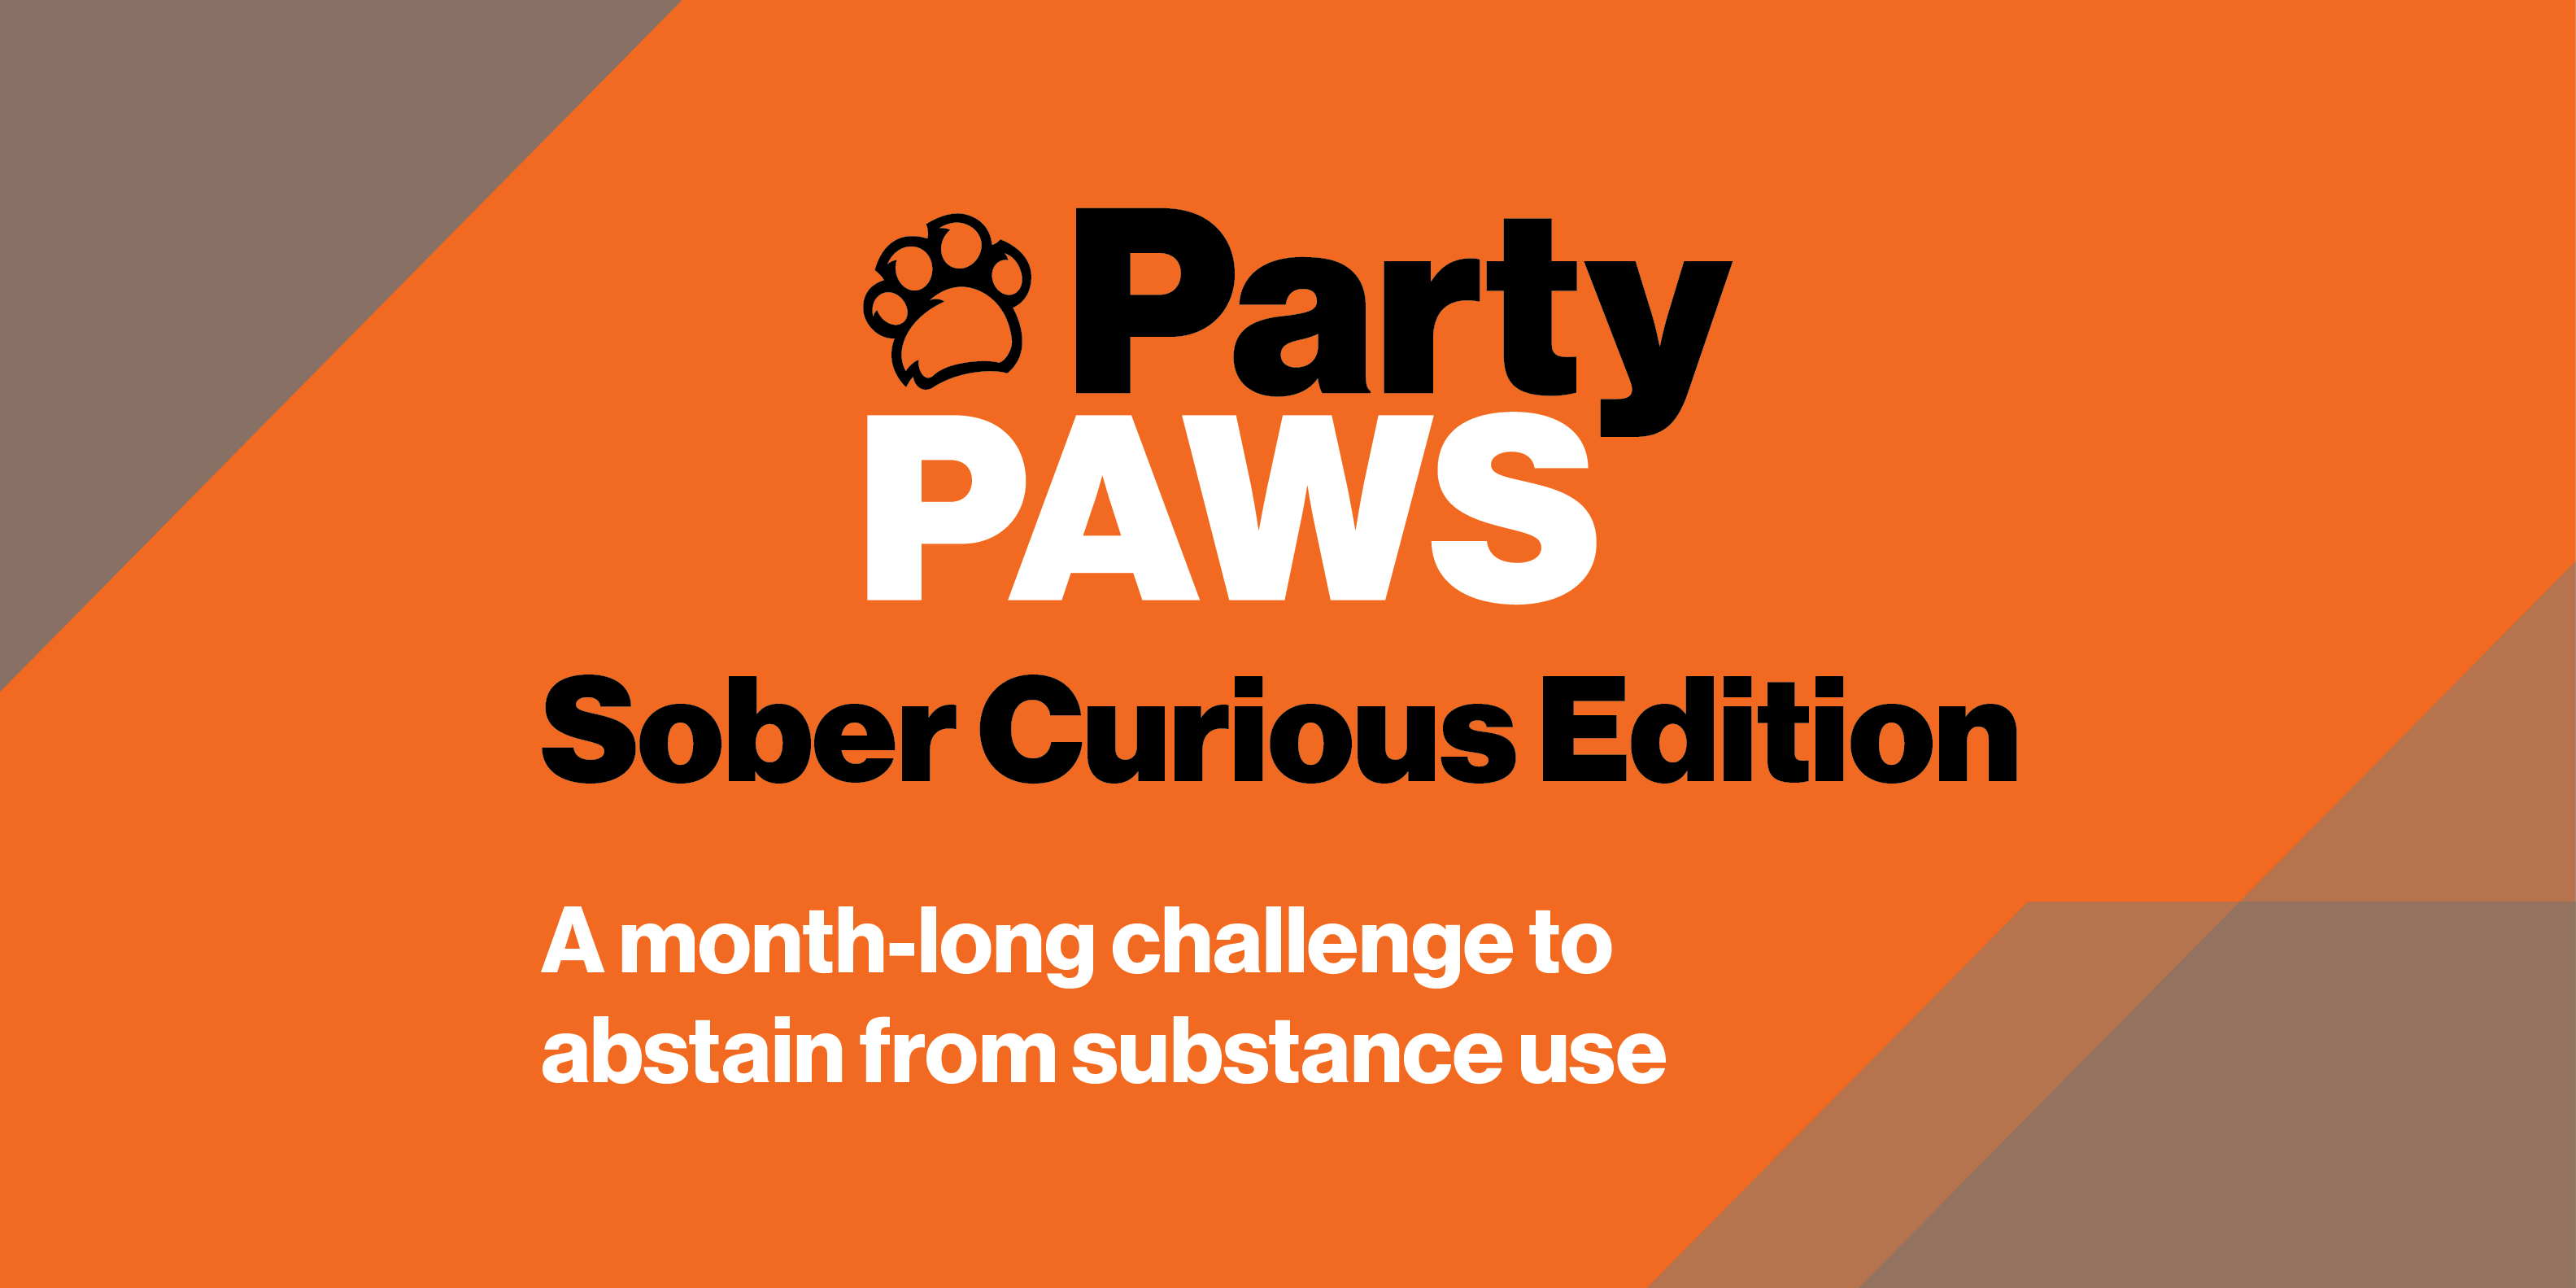 PartyPAWS: Sober Curious Edition A month-long challenge to abstain from substance use